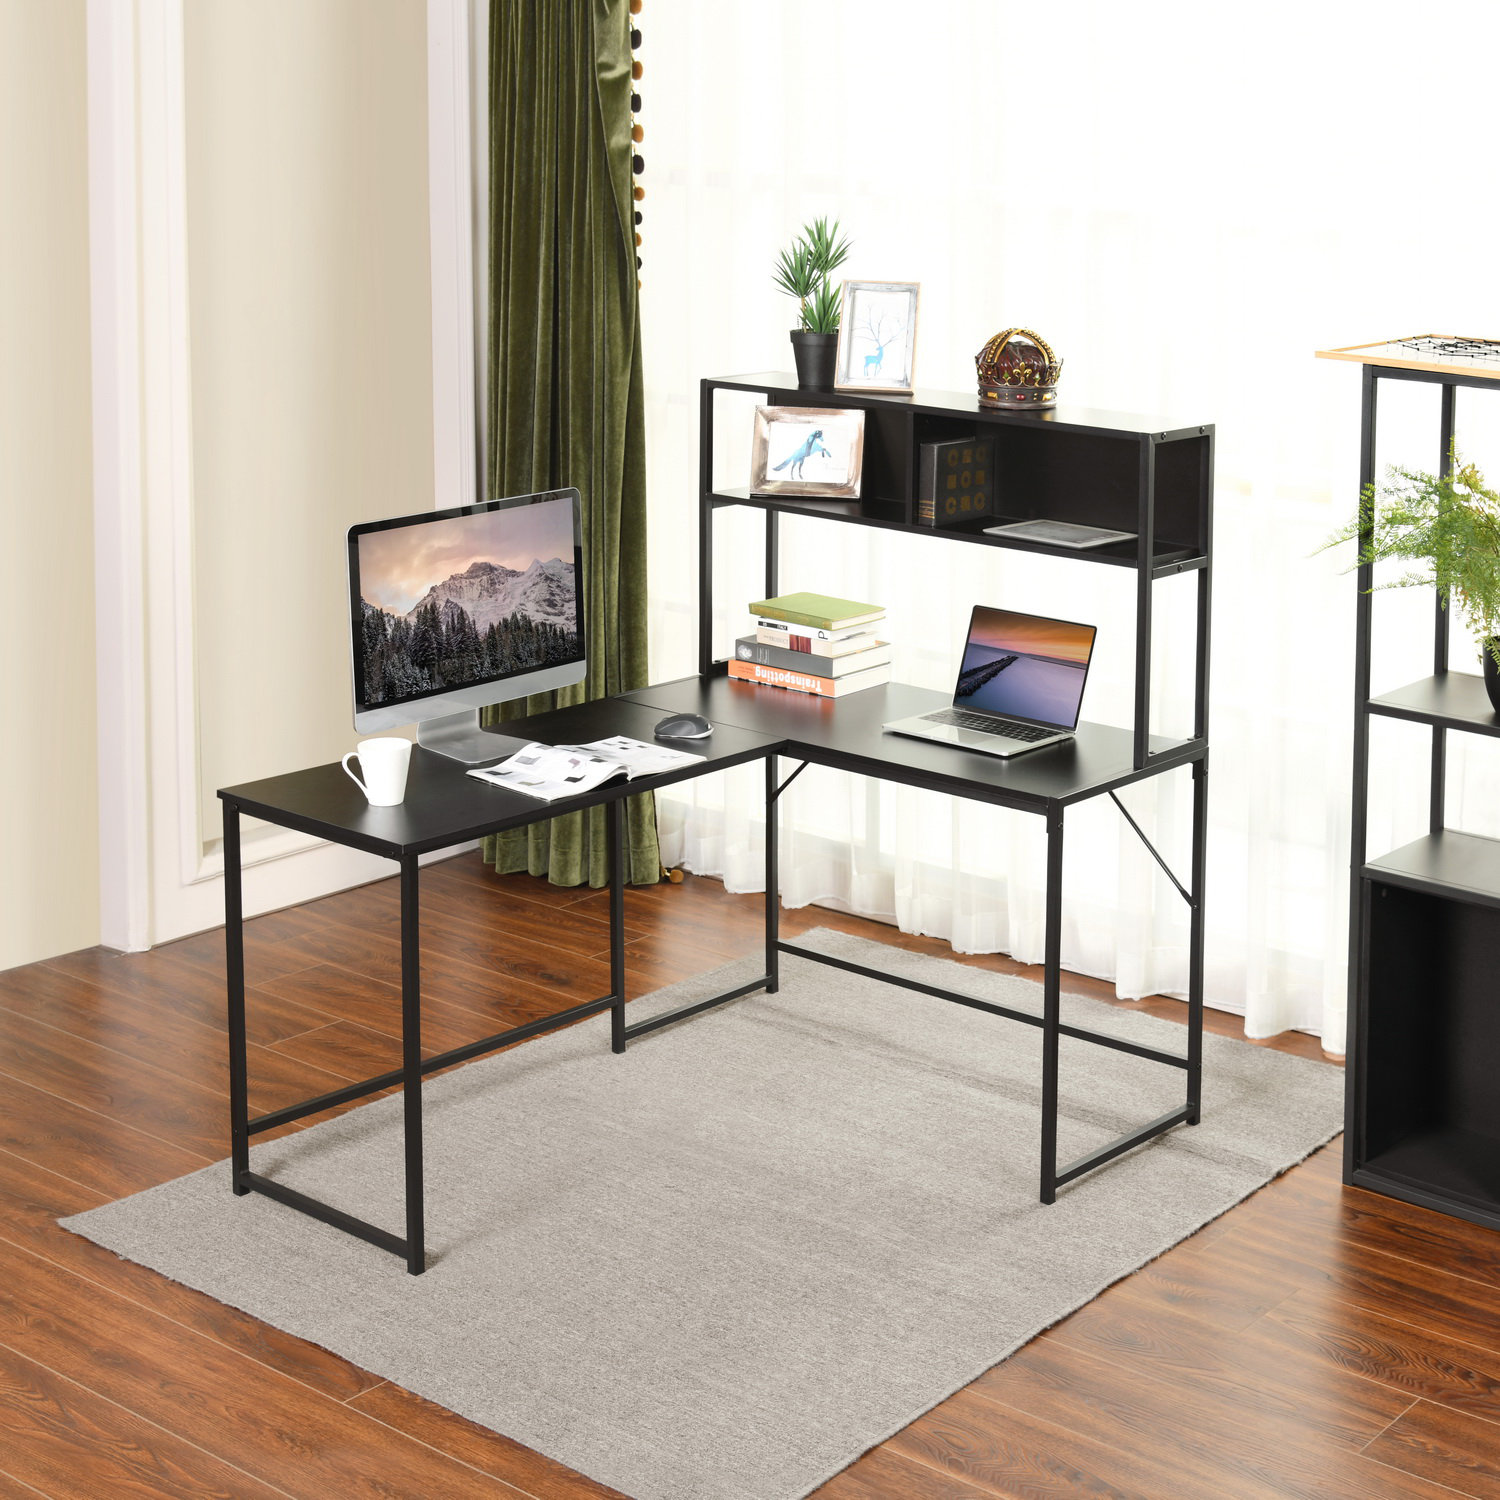 Lyle 54.3 Large Computer Desk L-Shaped Desk with Bookshelf for Home Office